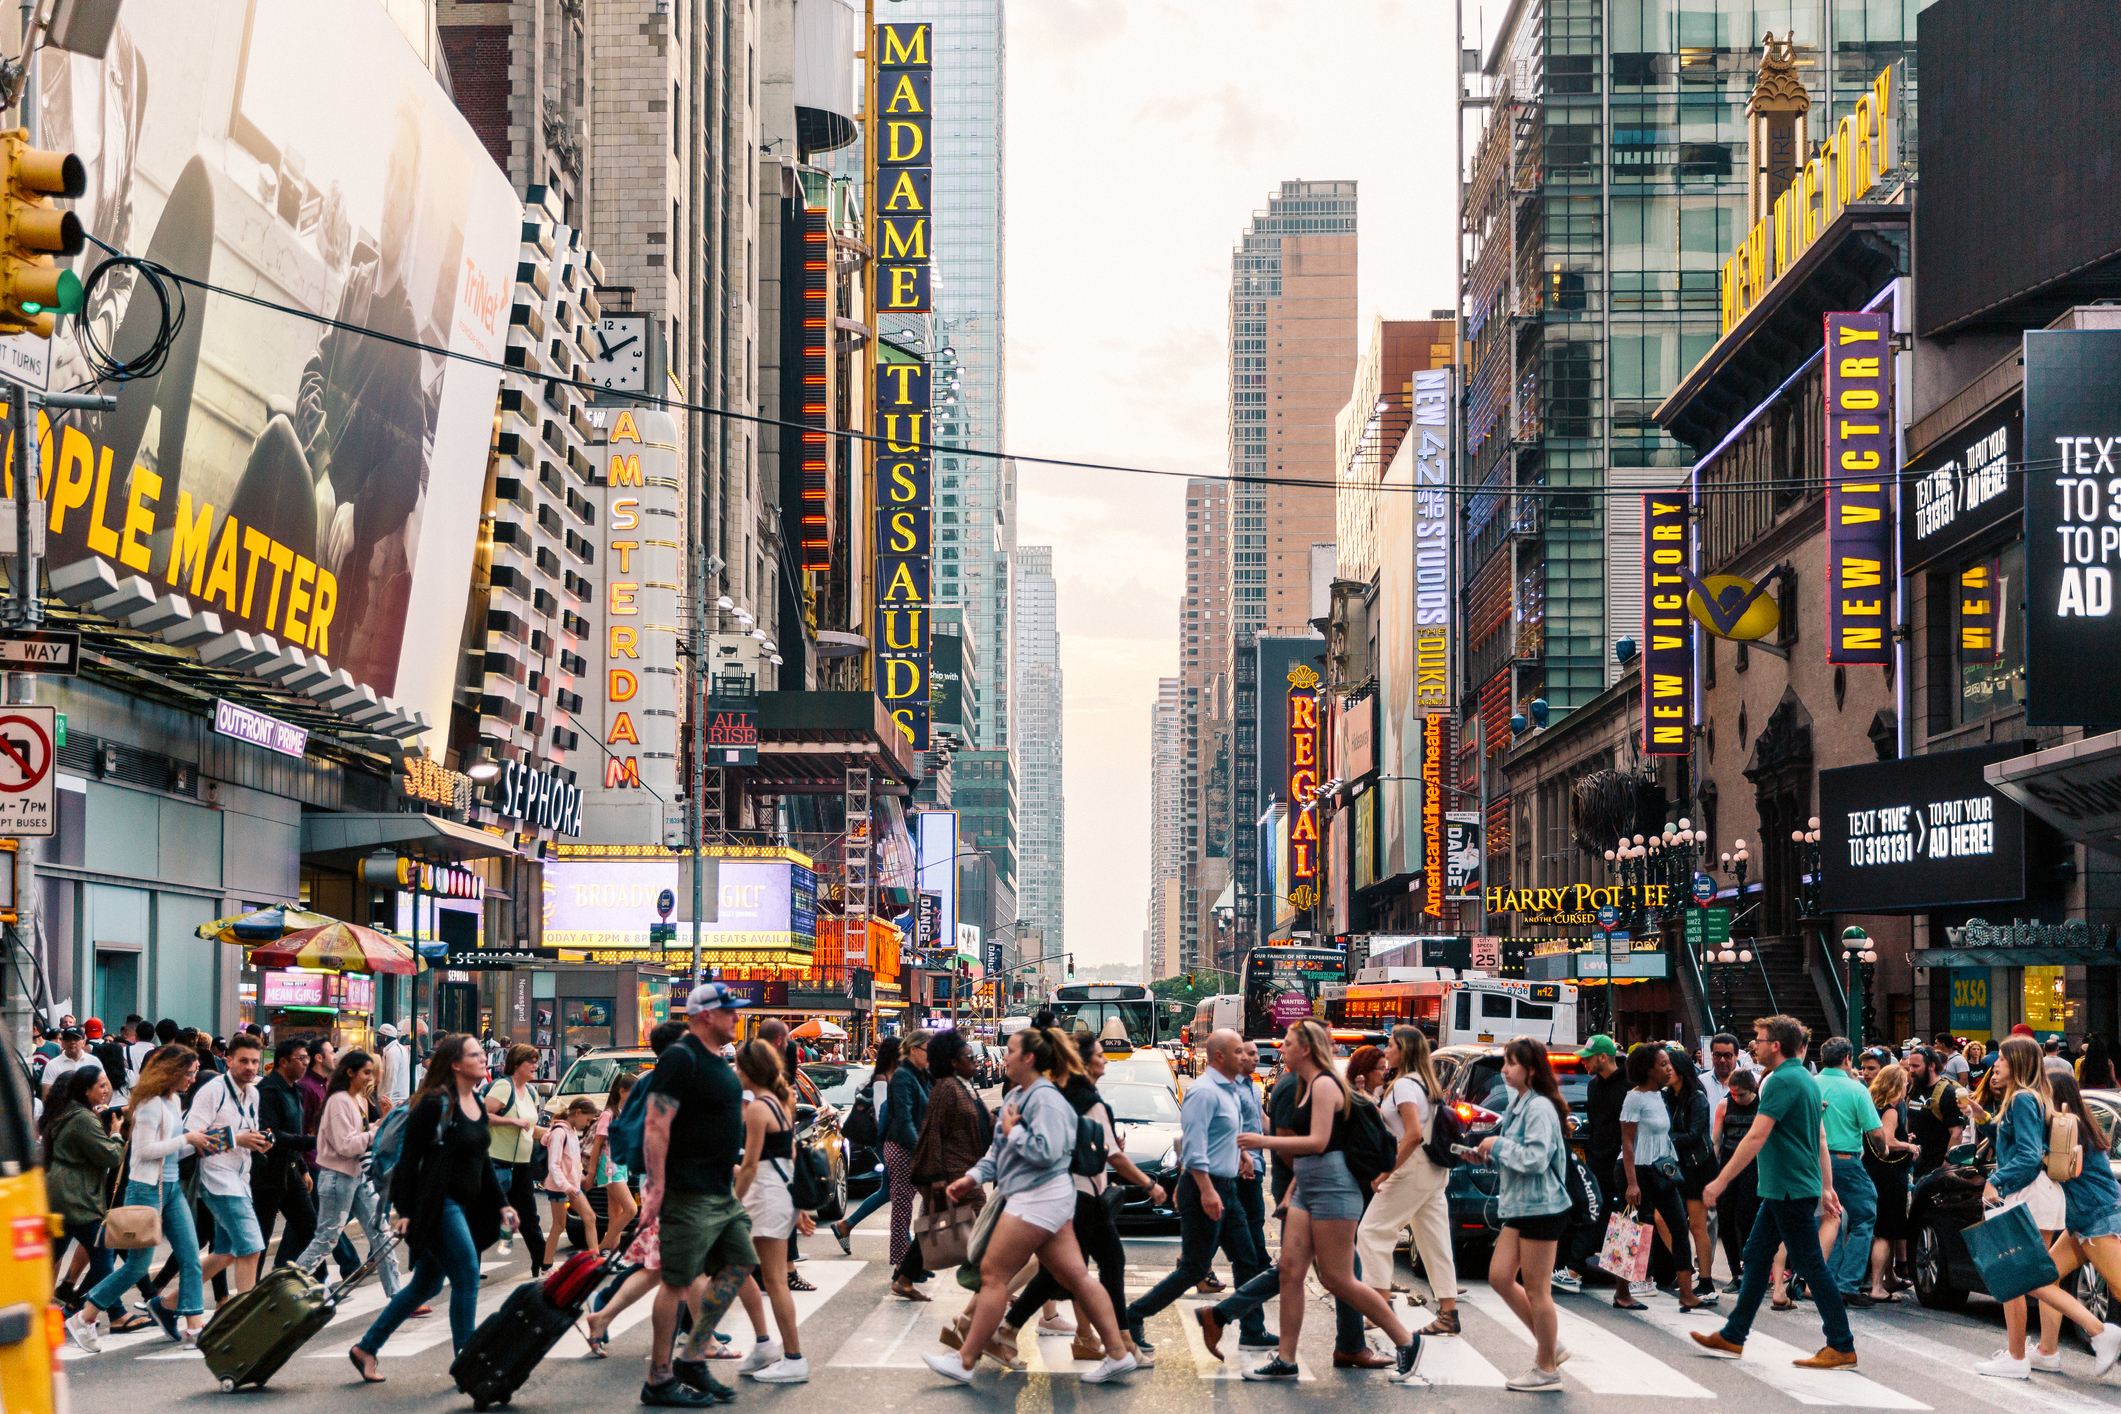 Pedestrians crossing a busy street in Times Square with billboards and buildings in the background